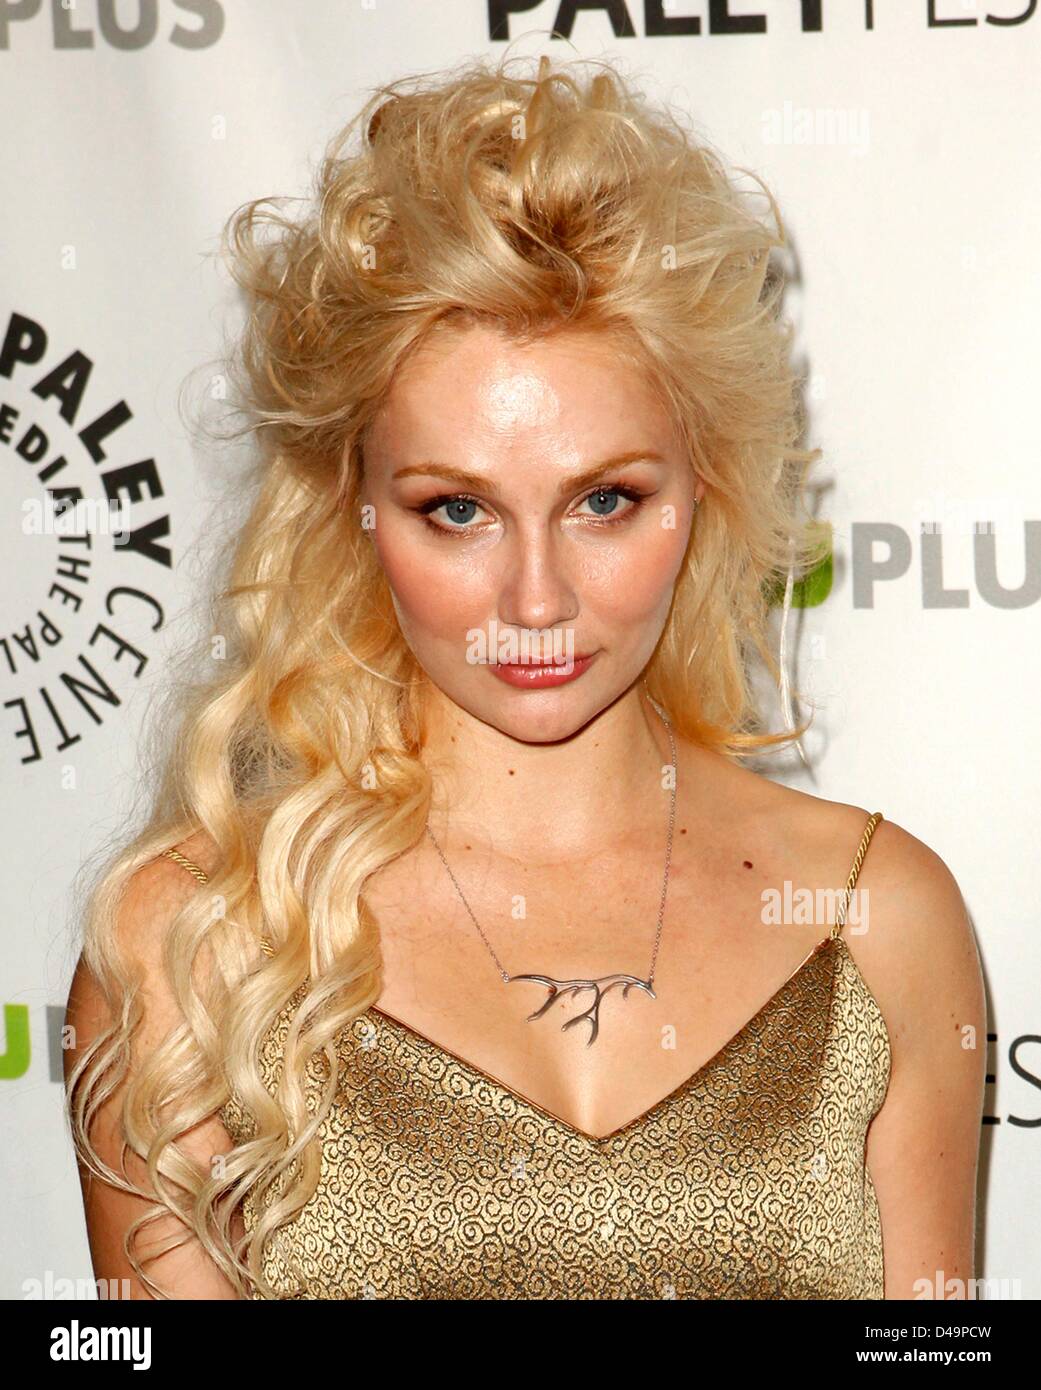 Clare Bowen at arrivals for NASHVILLE Panel at the 30th Annual Paleyfest, Saban Theatre, Los Angeles, CA March 9, 2013. Photo By: Emiley Schweich/Everett Collection/Alamy Live News Stock Photo